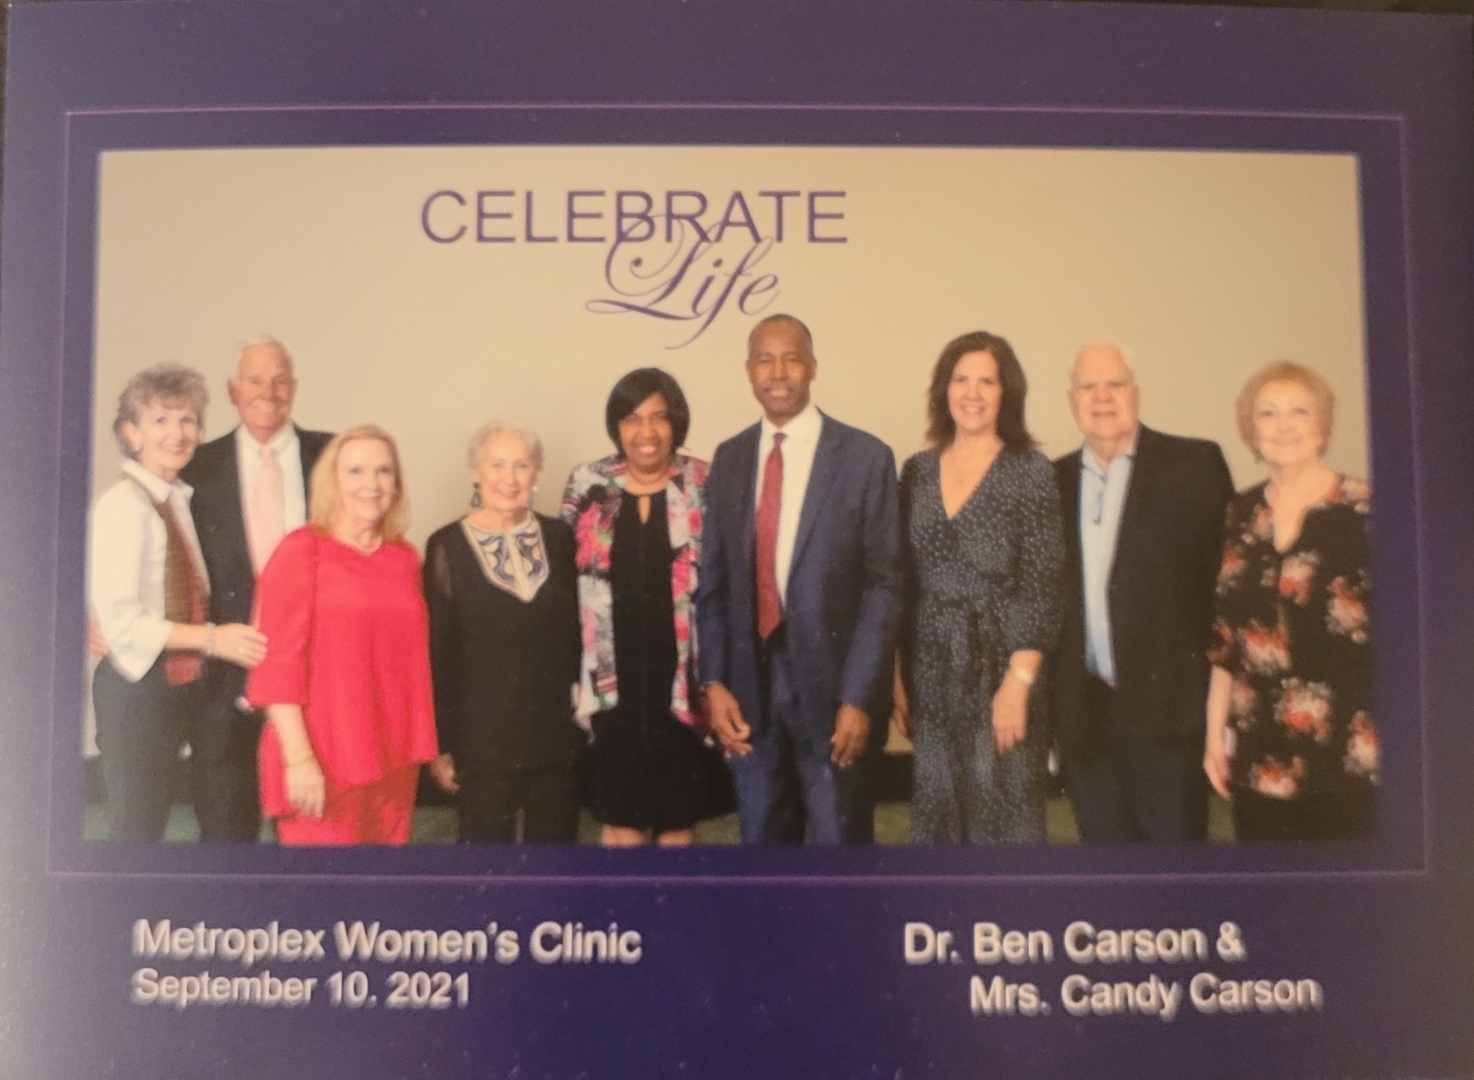 DrBen_Carson_and_Candy_with_Metroplex_Women_s...